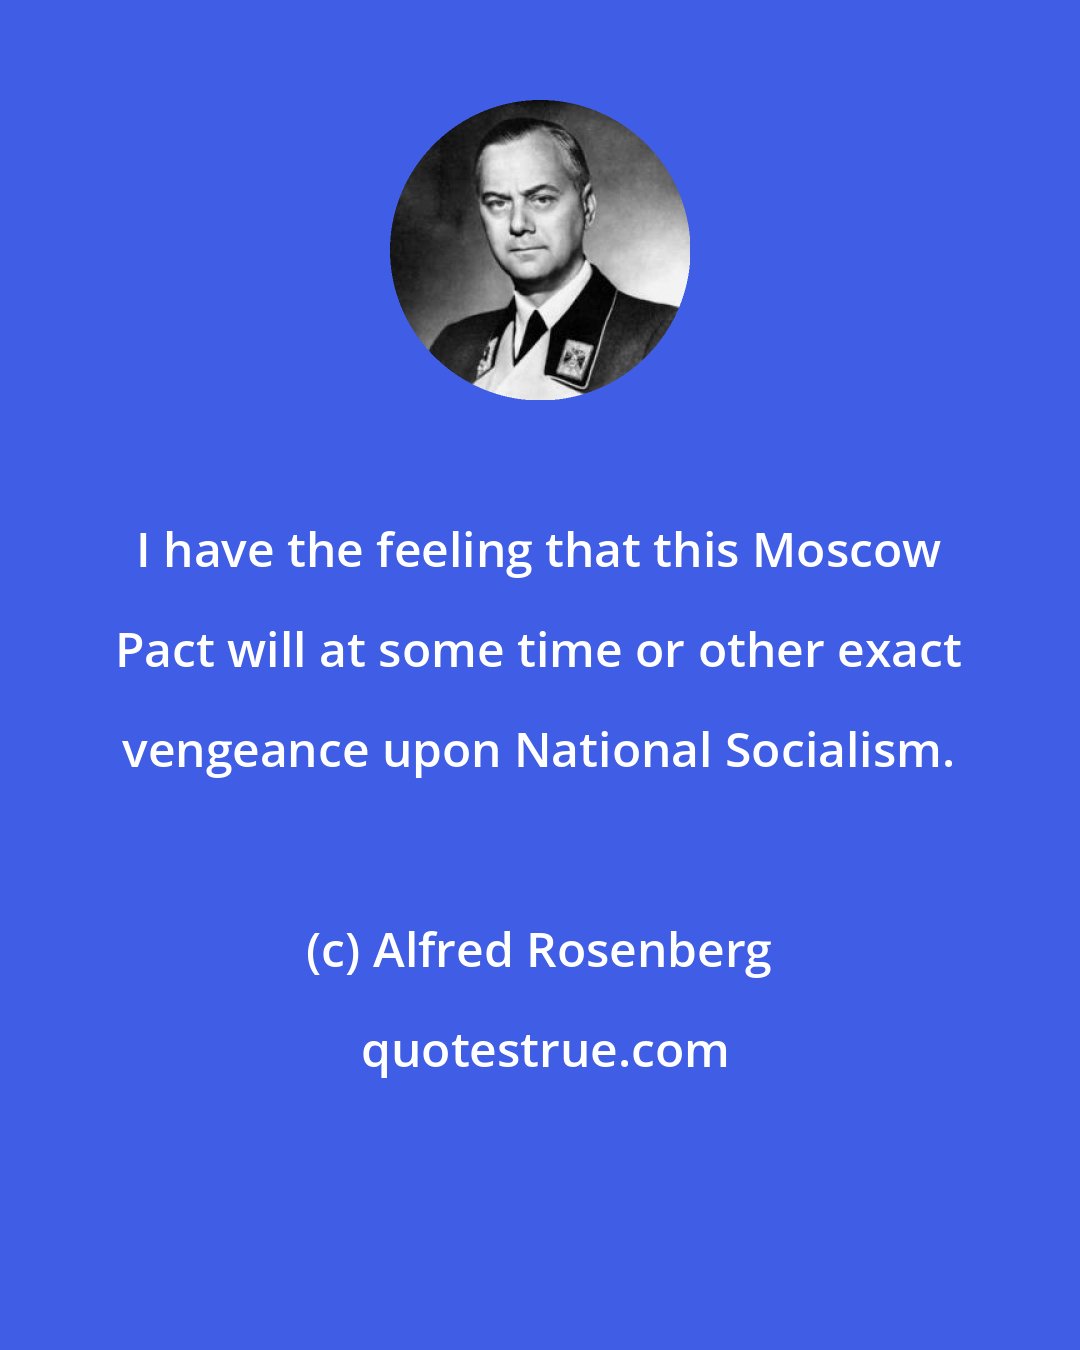 Alfred Rosenberg: I have the feeling that this Moscow Pact will at some time or other exact vengeance upon National Socialism.